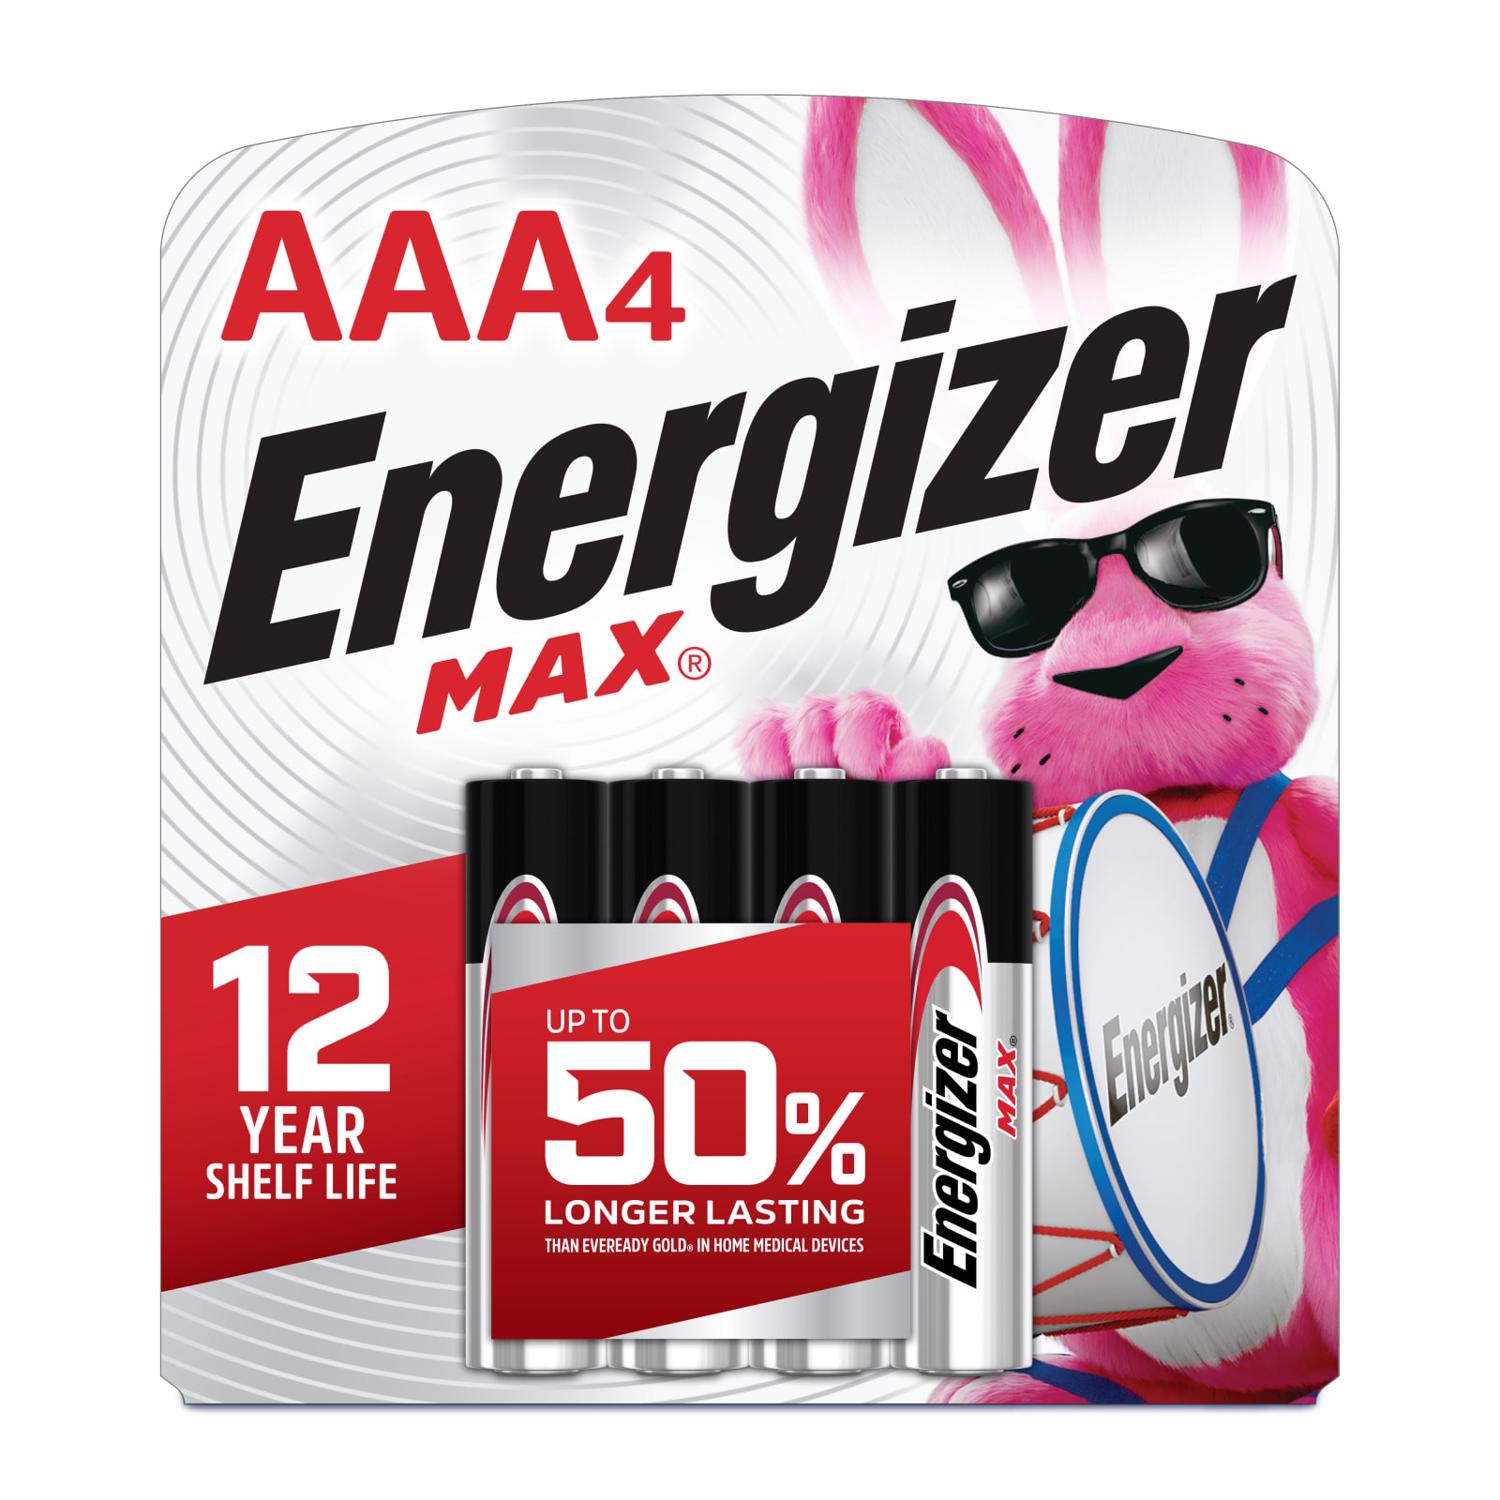 Photos - Household Switch Energizer Max Premium AAA Alkaline Batteries 4 pk Carded E92BP-4 